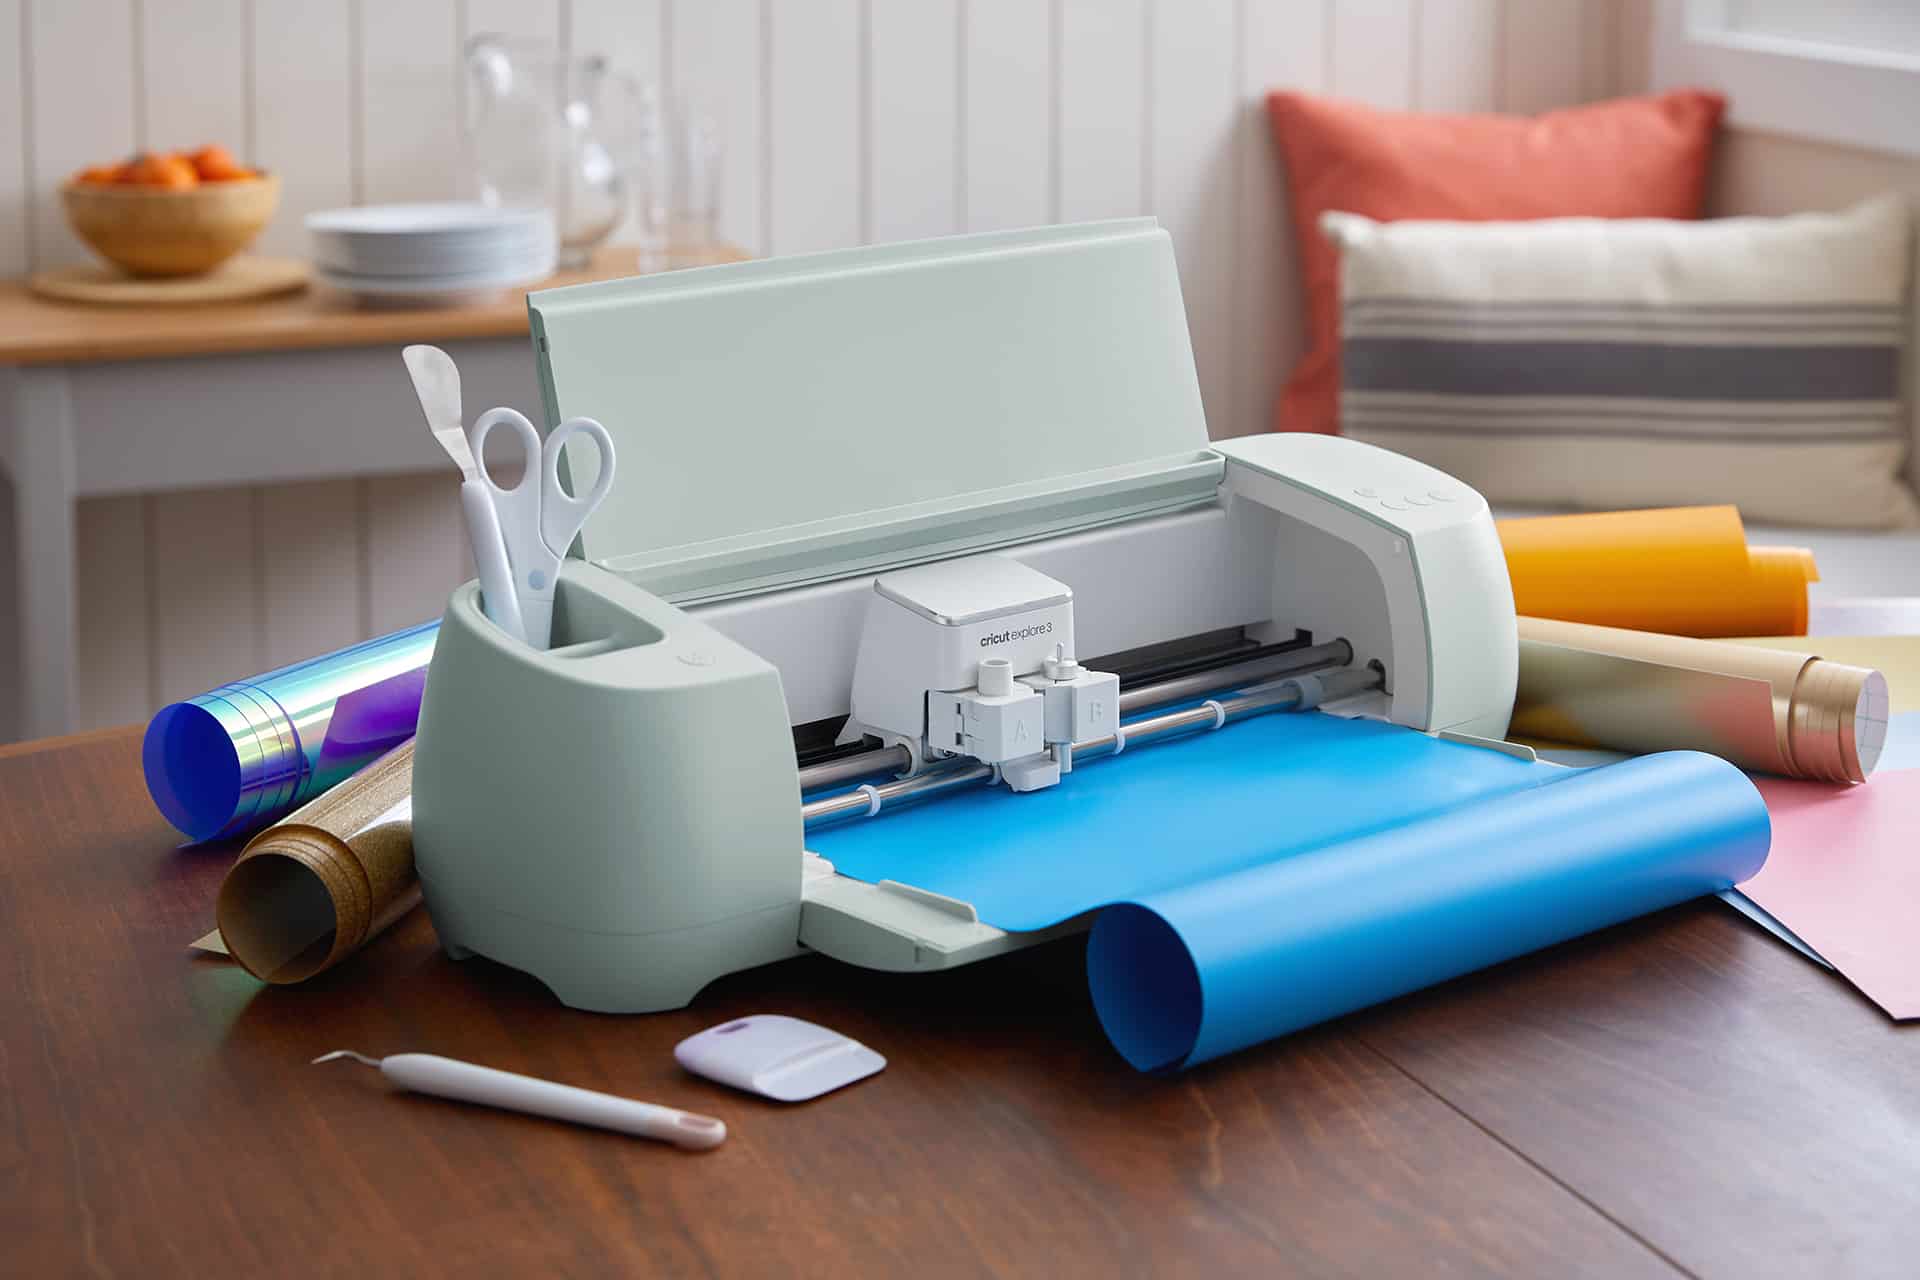 Guide to Using Different Materials with the Cricut Explore Air